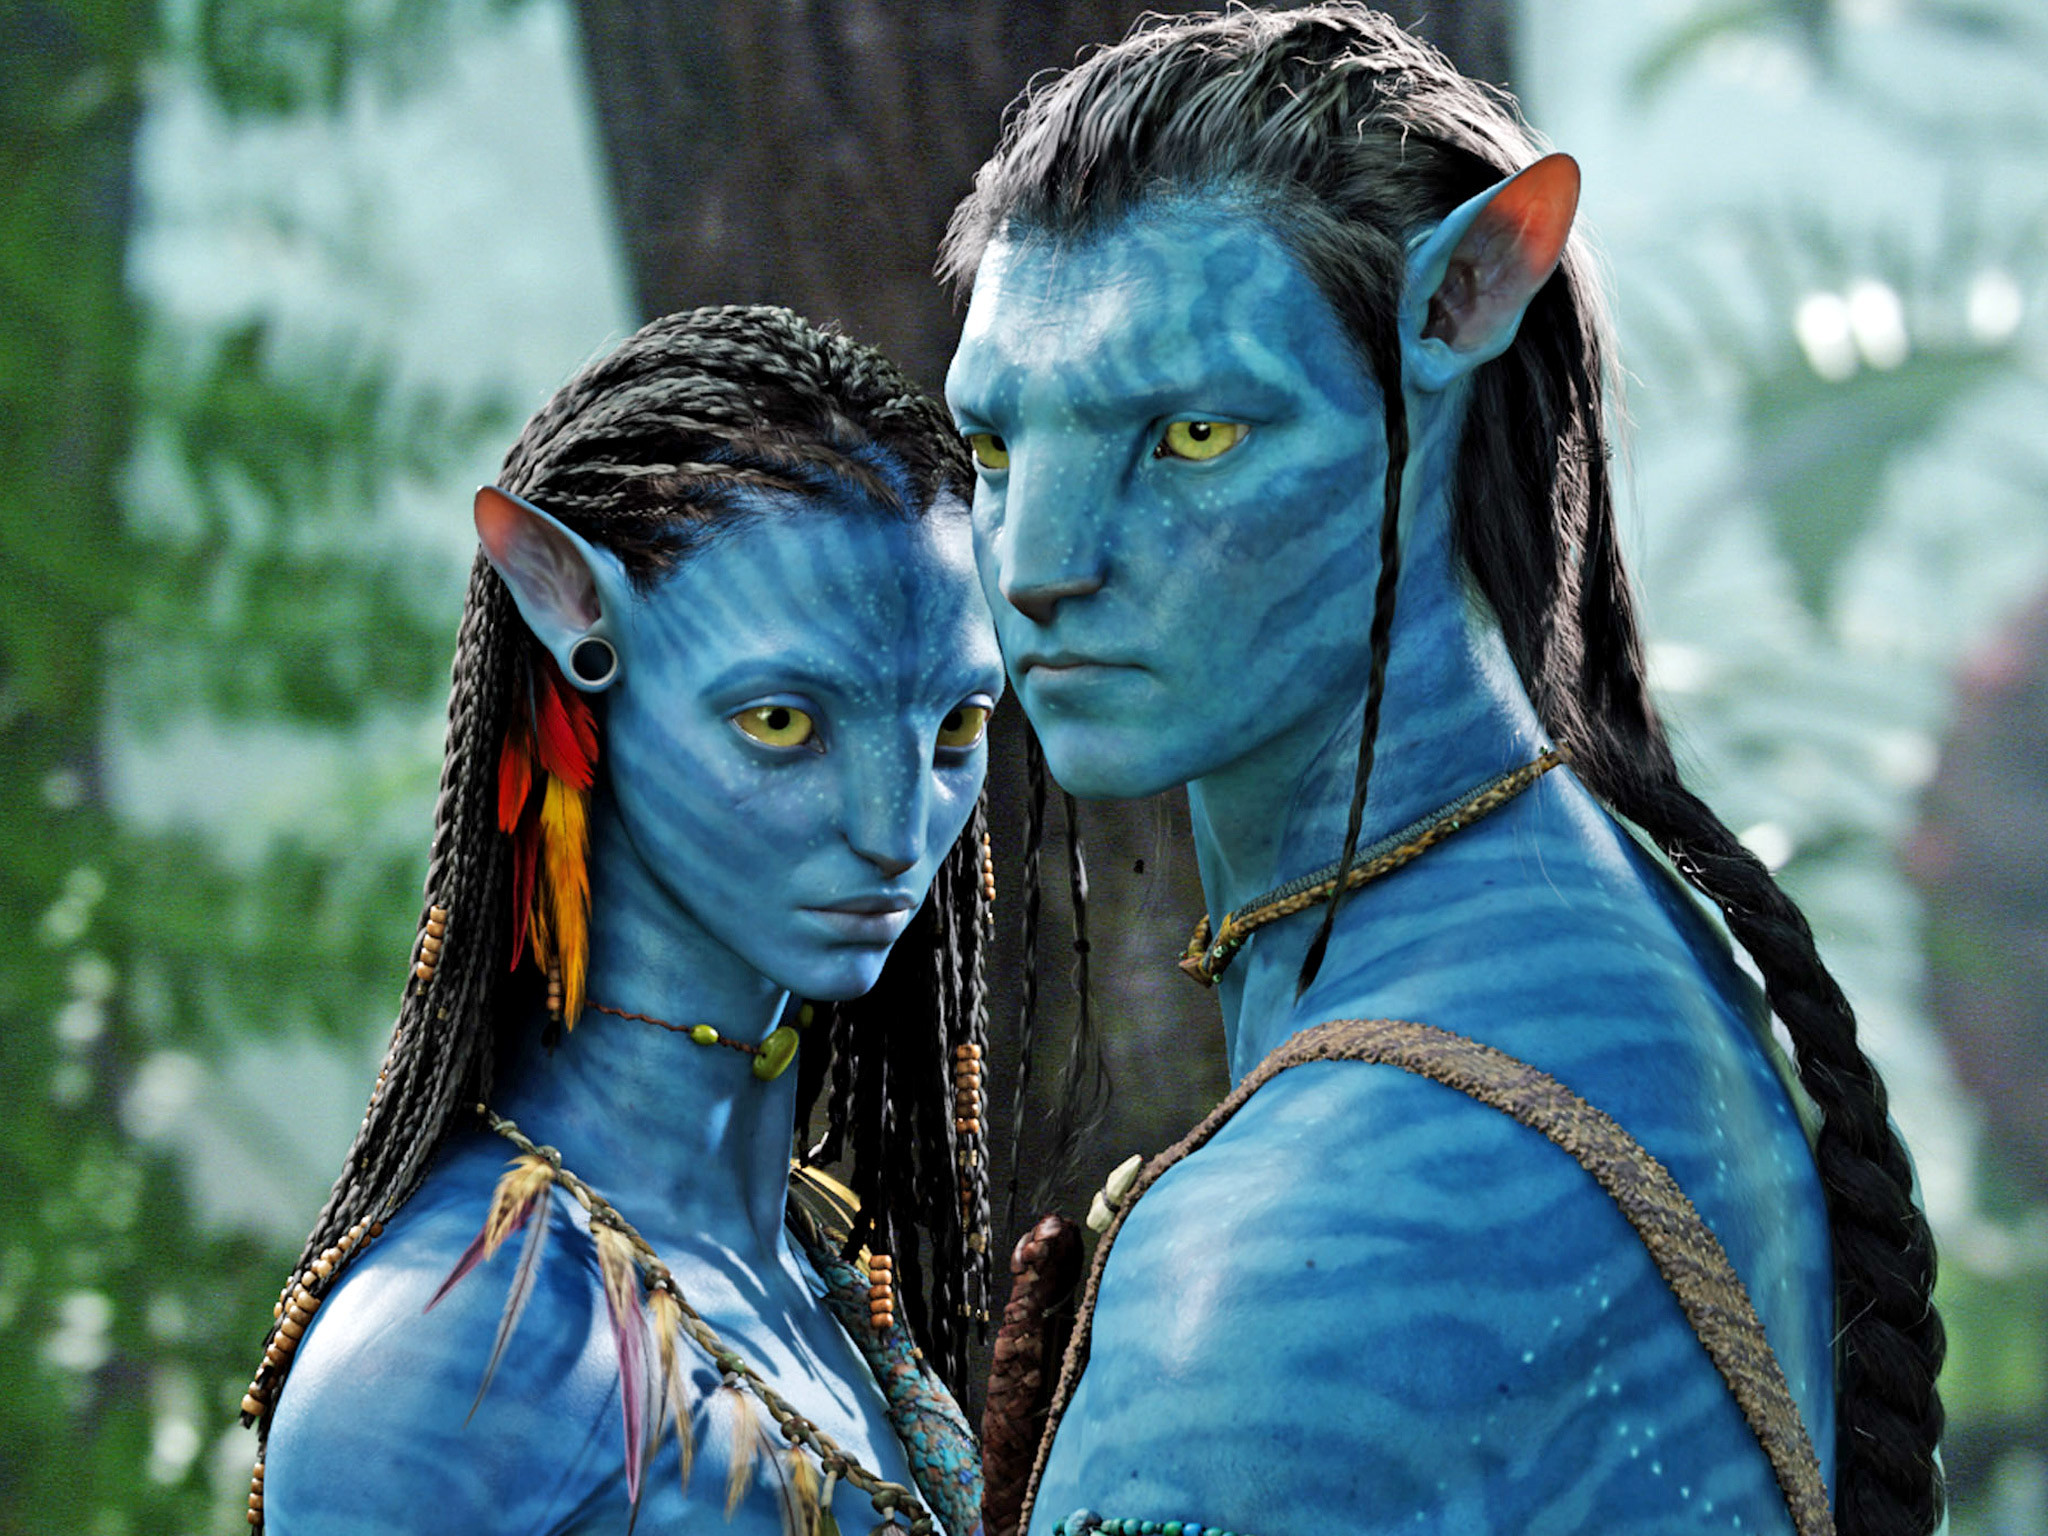 2048x1536 0 1920x1080 Avatar Hd Wallpapers 1080p allofpicts  Avatar Images,  Amazing 33 Wallpapers of Avatar, Top Avatar